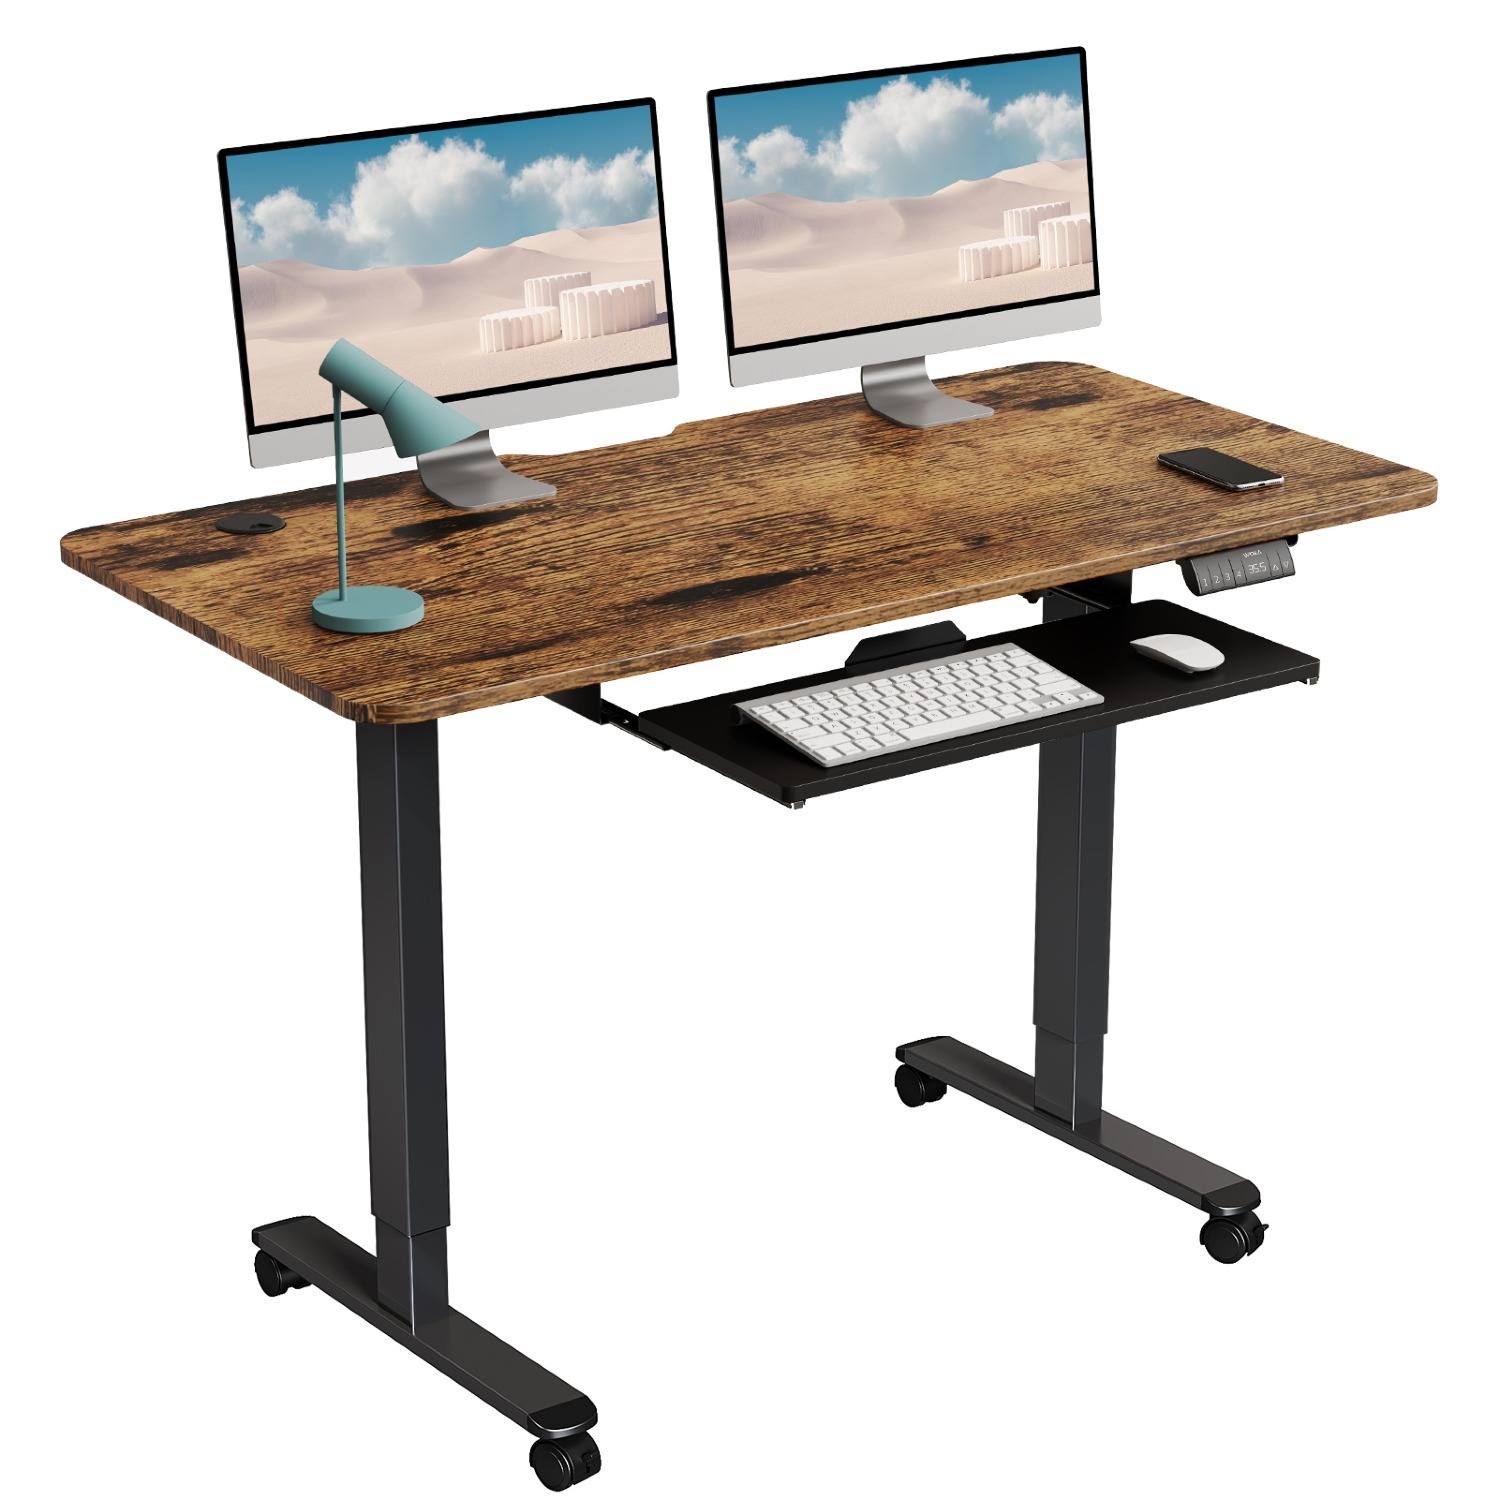 48" x 24" WOKA Electric Standing Office Desk w/ Keyboard Tray & Memory Controller (Rustic Brown) $123 + Free Shipping